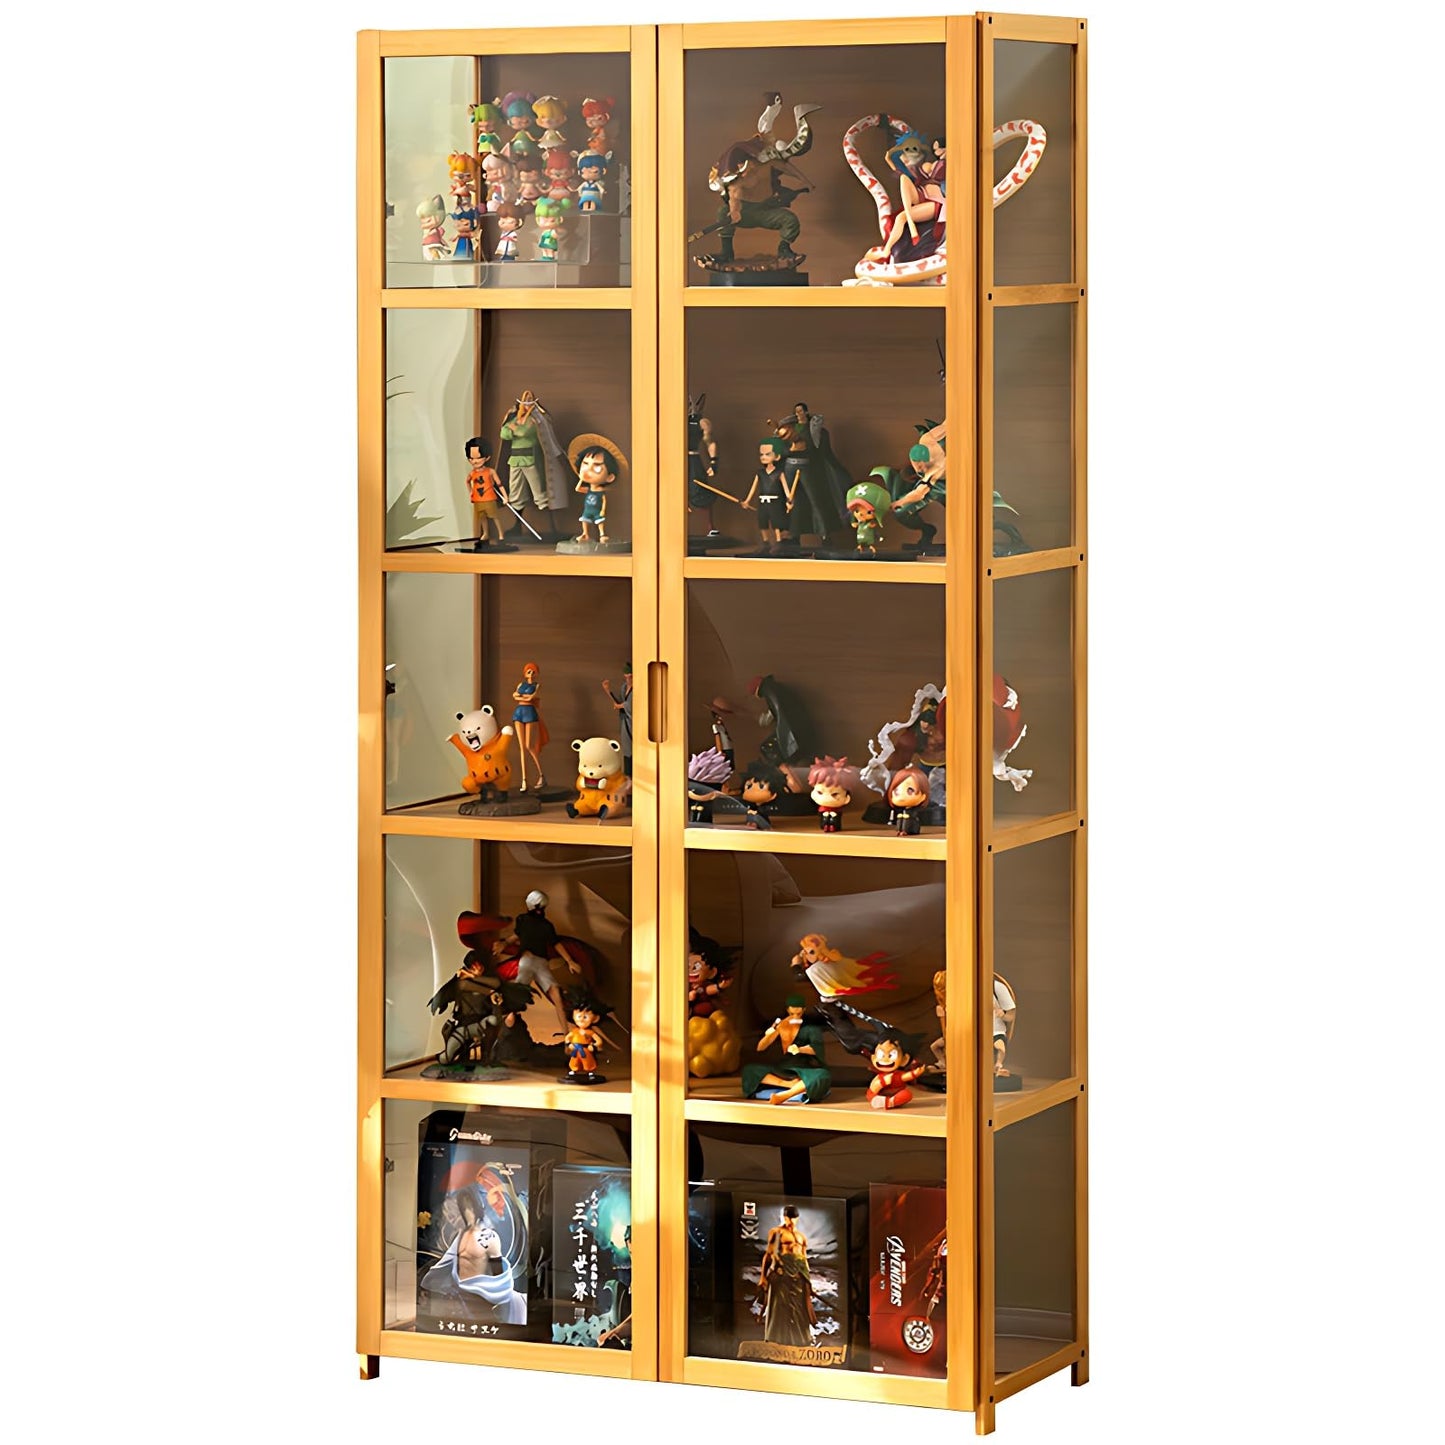 idhhco 5 Tier Curio Display Cabinet, Storage Cabinet with Acrylic Glass Door, Collectibles Toy Organizers Rack & Display Shelf, Kids Bookcase for